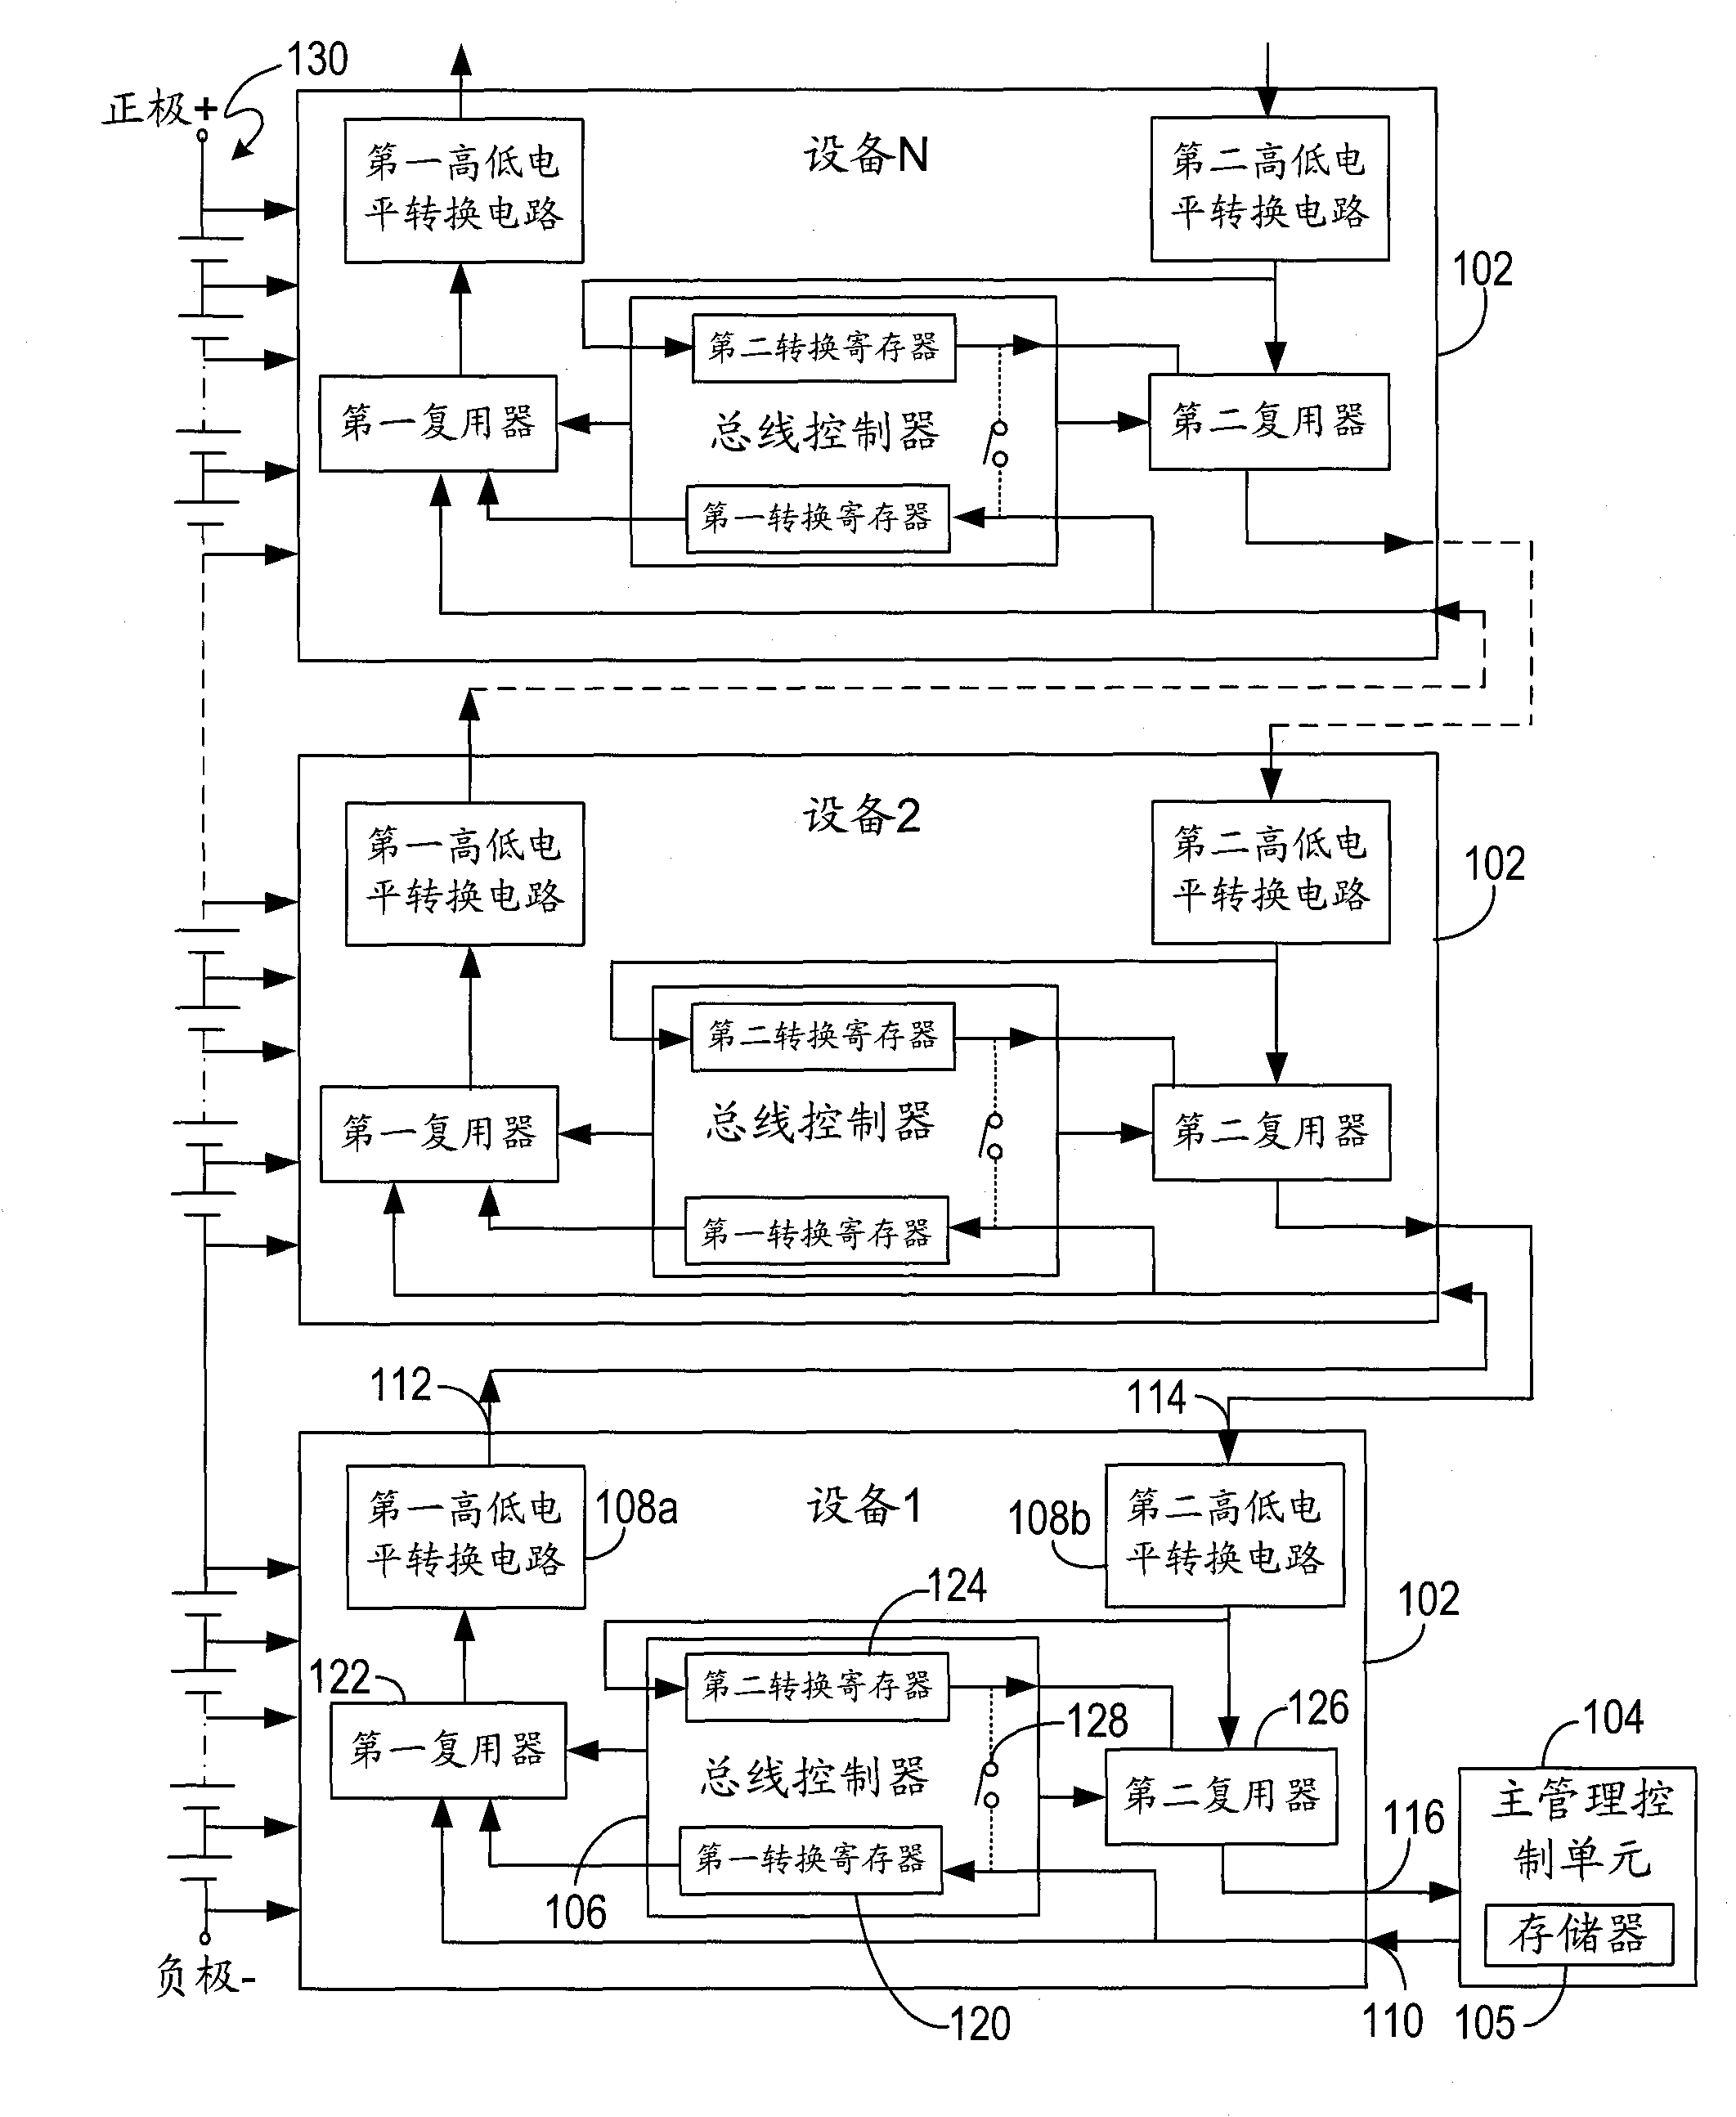 Address configuration device, method and system